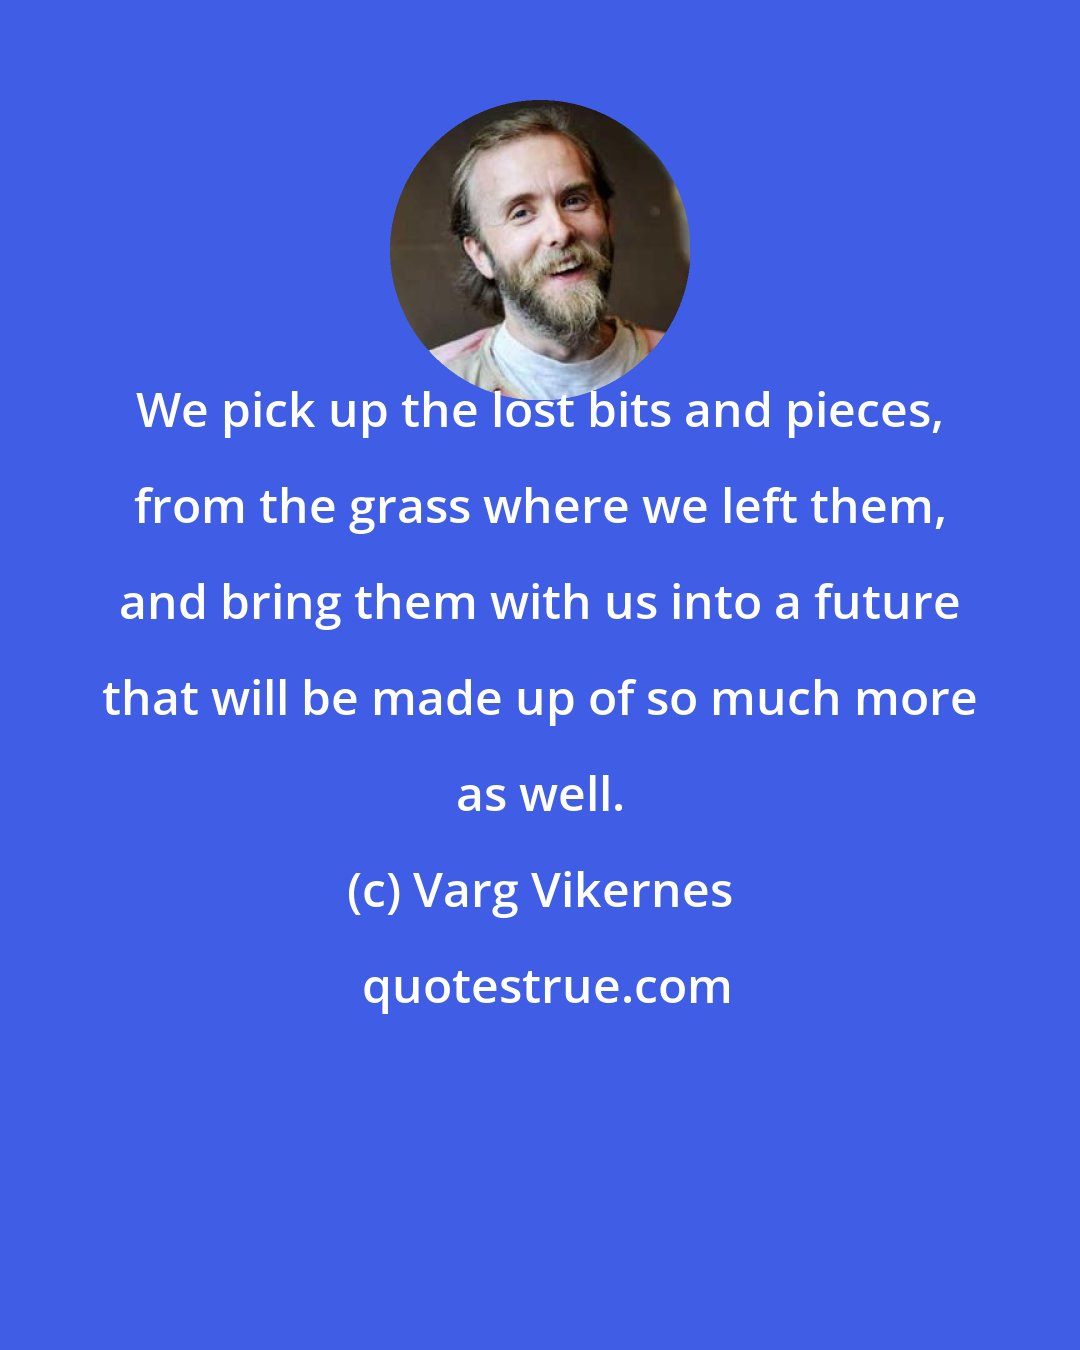 Varg Vikernes: We pick up the lost bits and pieces, from the grass where we left them, and bring them with us into a future that will be made up of so much more as well.